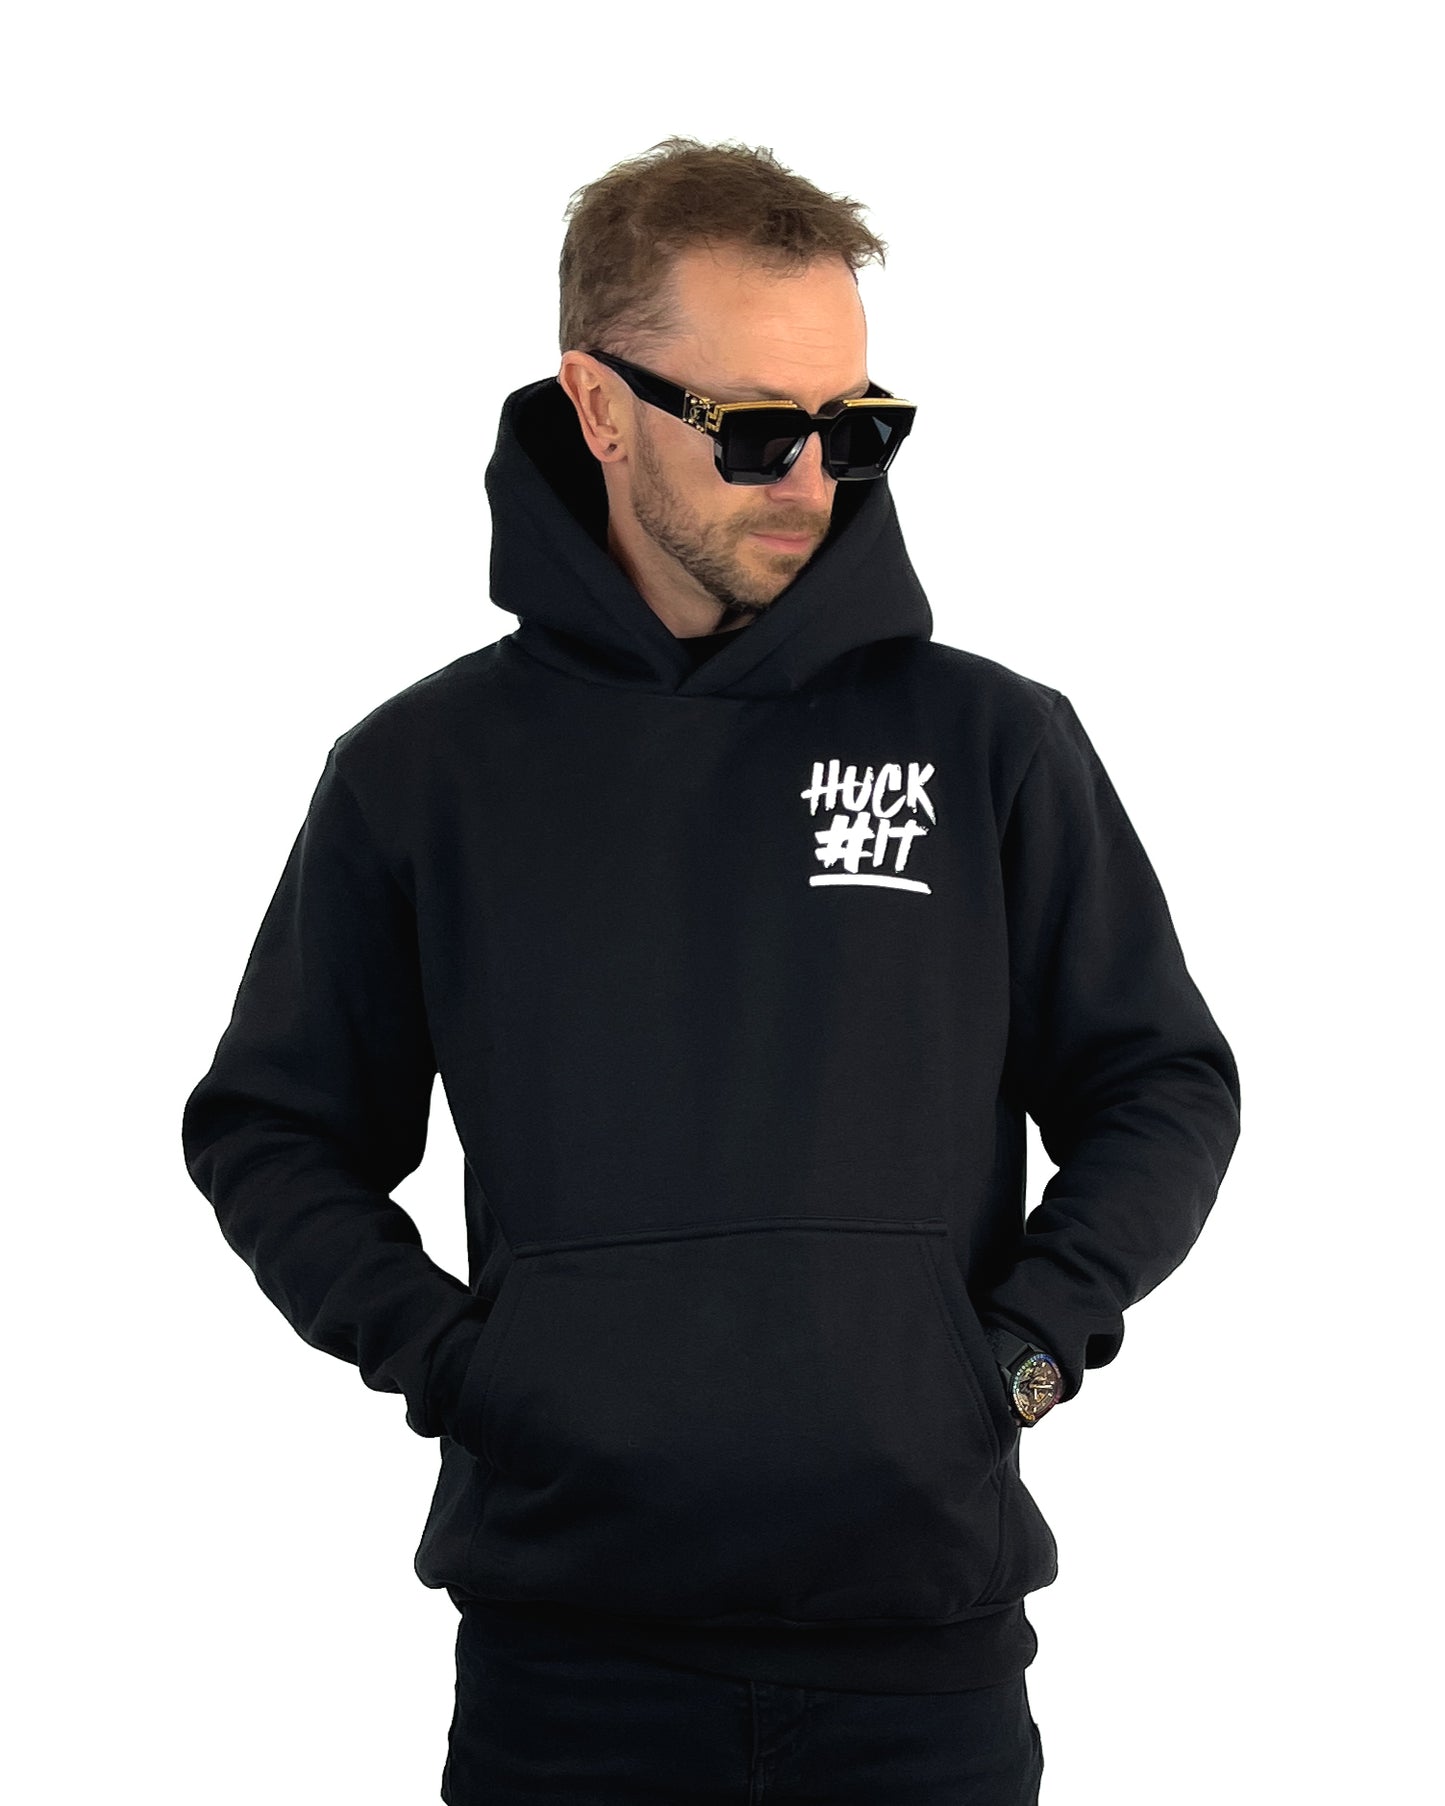 THE MOTTO HOODIE